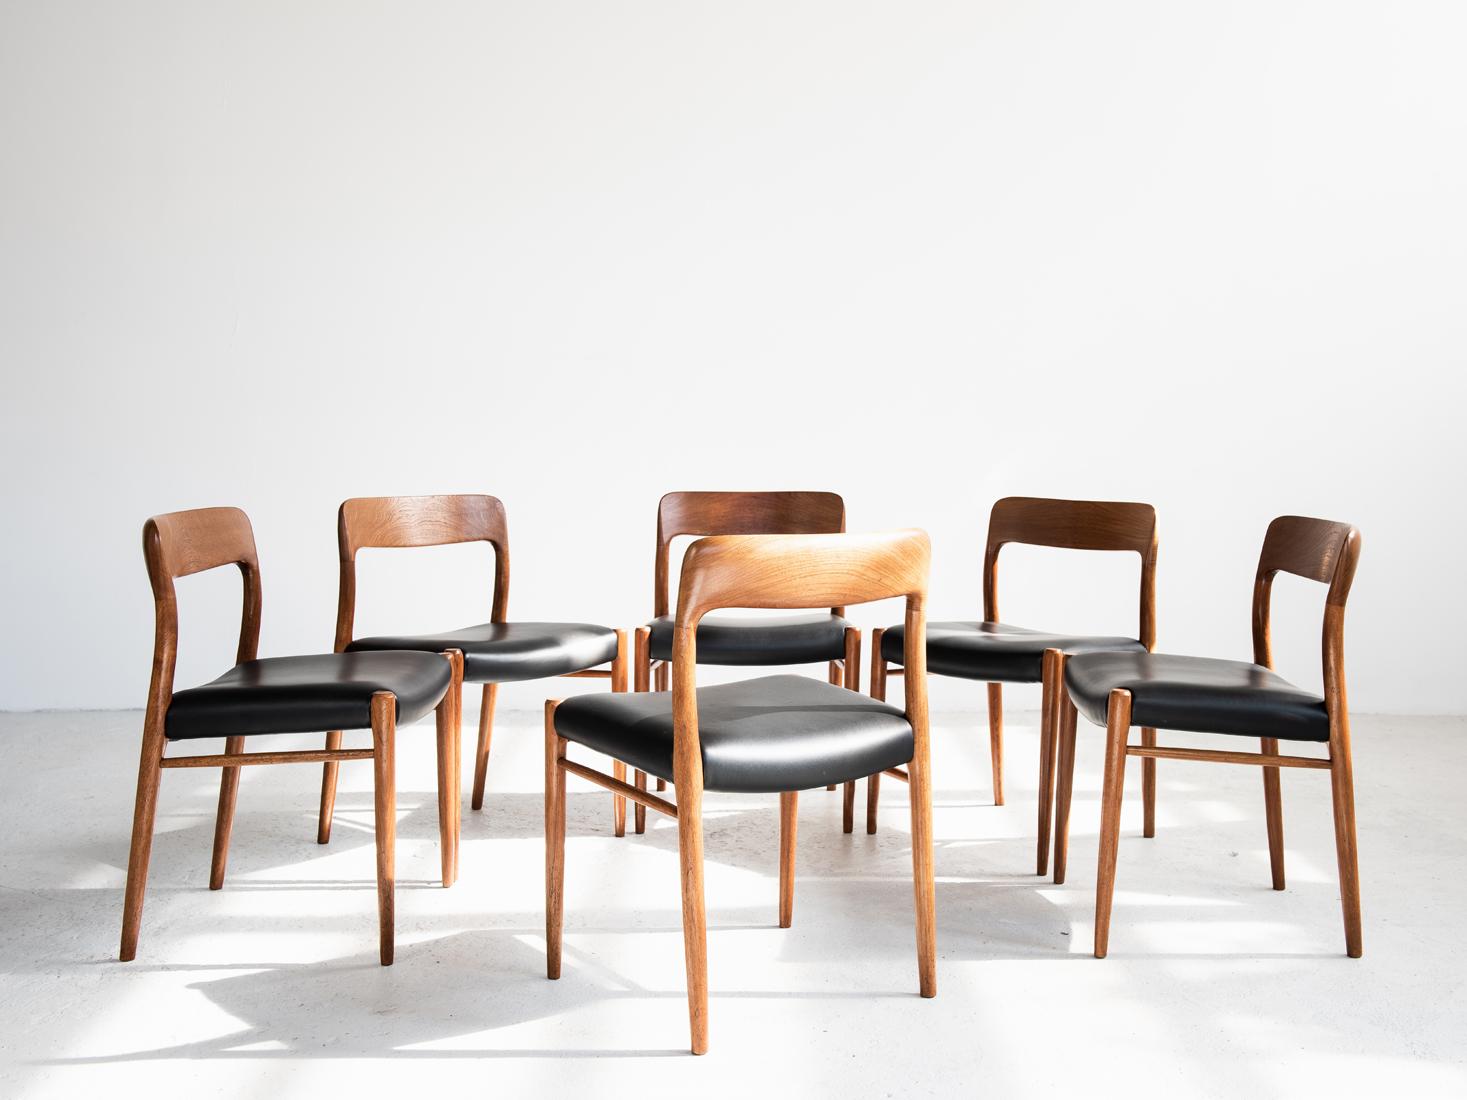 20th Century Midcentury Danish Set of 6 Chairs in Teak and Leather by Møller